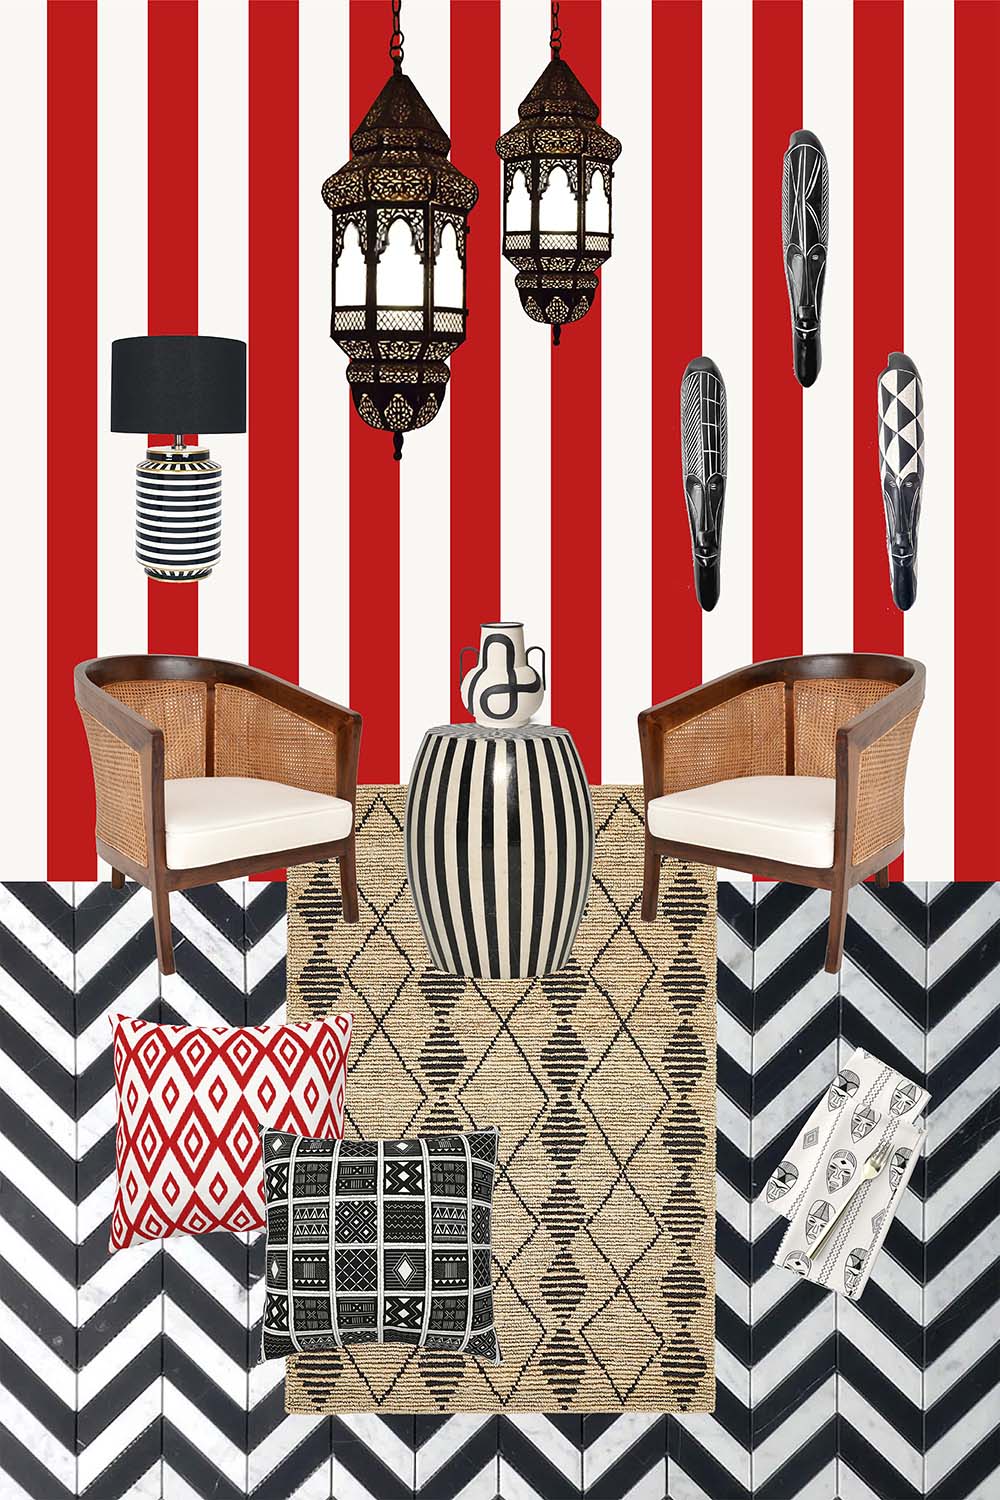 The Unexpected Magic of Red Striped Wallpaper in an Eclectic Home Decor